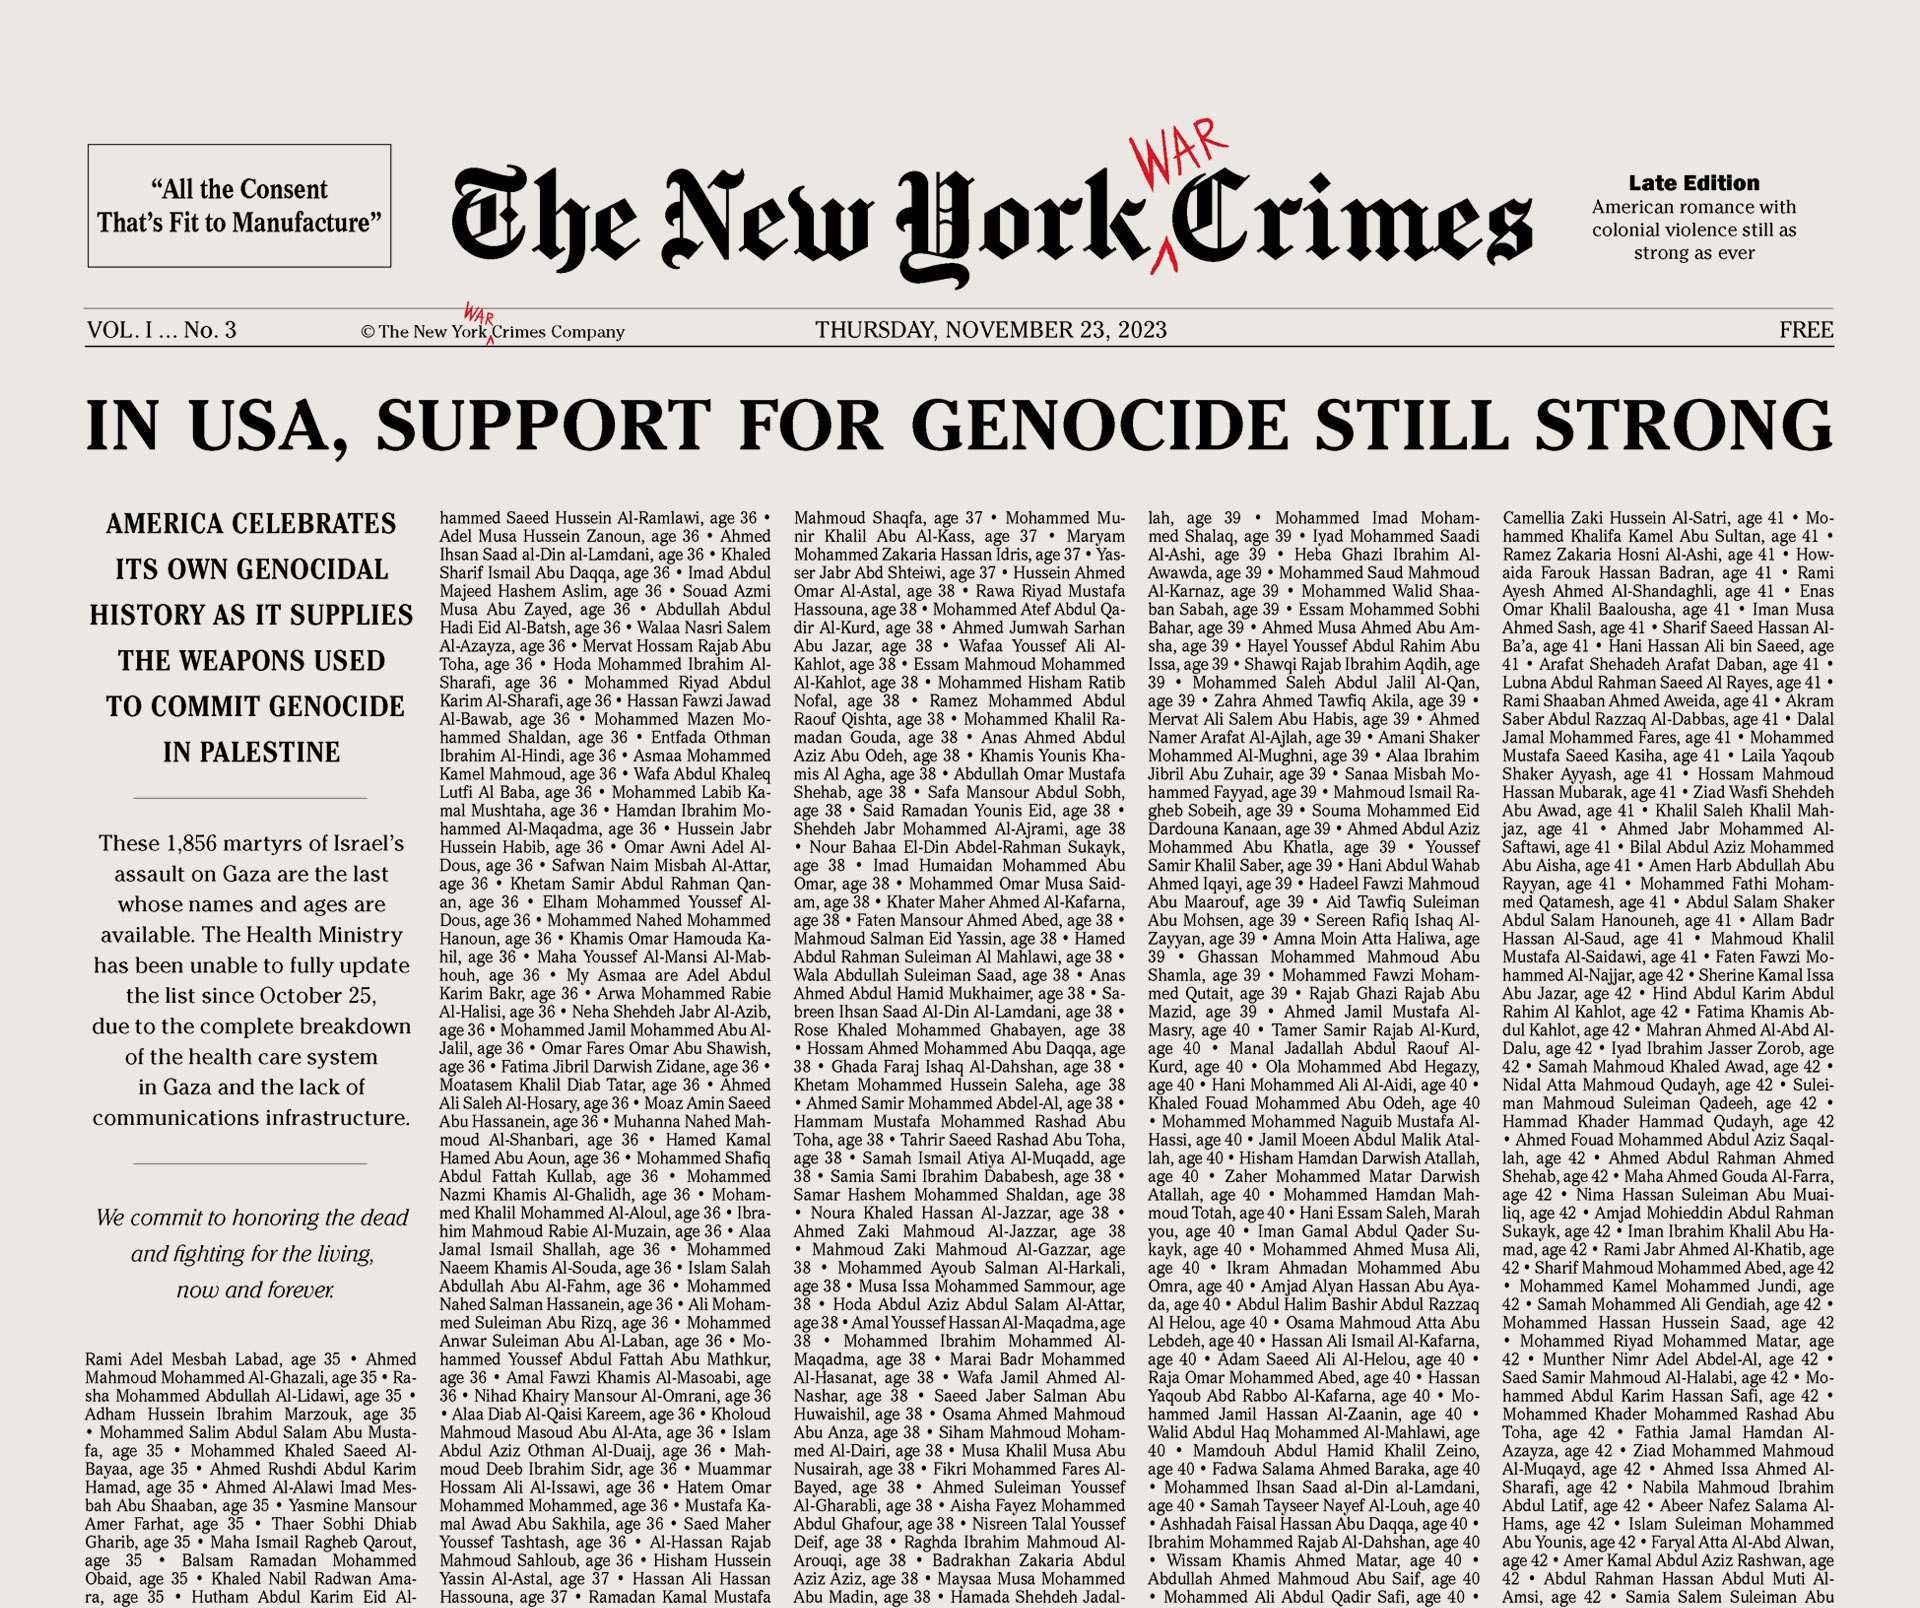 https://newyorkwarcrimes.com/media/pages/print-issue-vol-i-no-3-in-usa-support-for-genocide-is-still-strong/e43dd234e8-1709308050/ny-crimes-03-cover.jpg